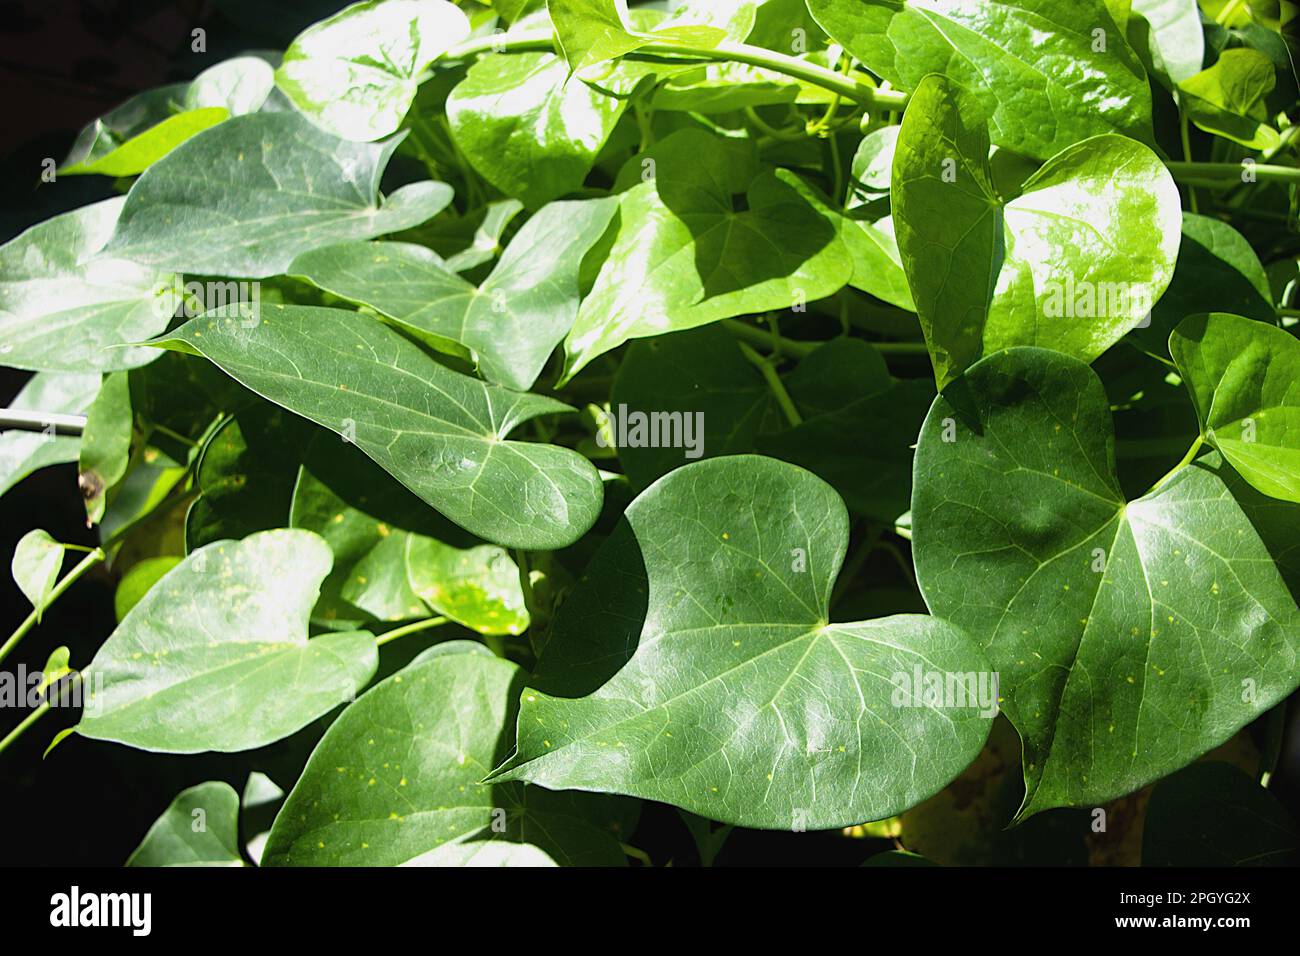 View of sunlit, heart-shaped green leaves of amrutha balli or giloy or Indian Tino sora or Heart-Leaved Tinospora or Guduchi Stock Photo